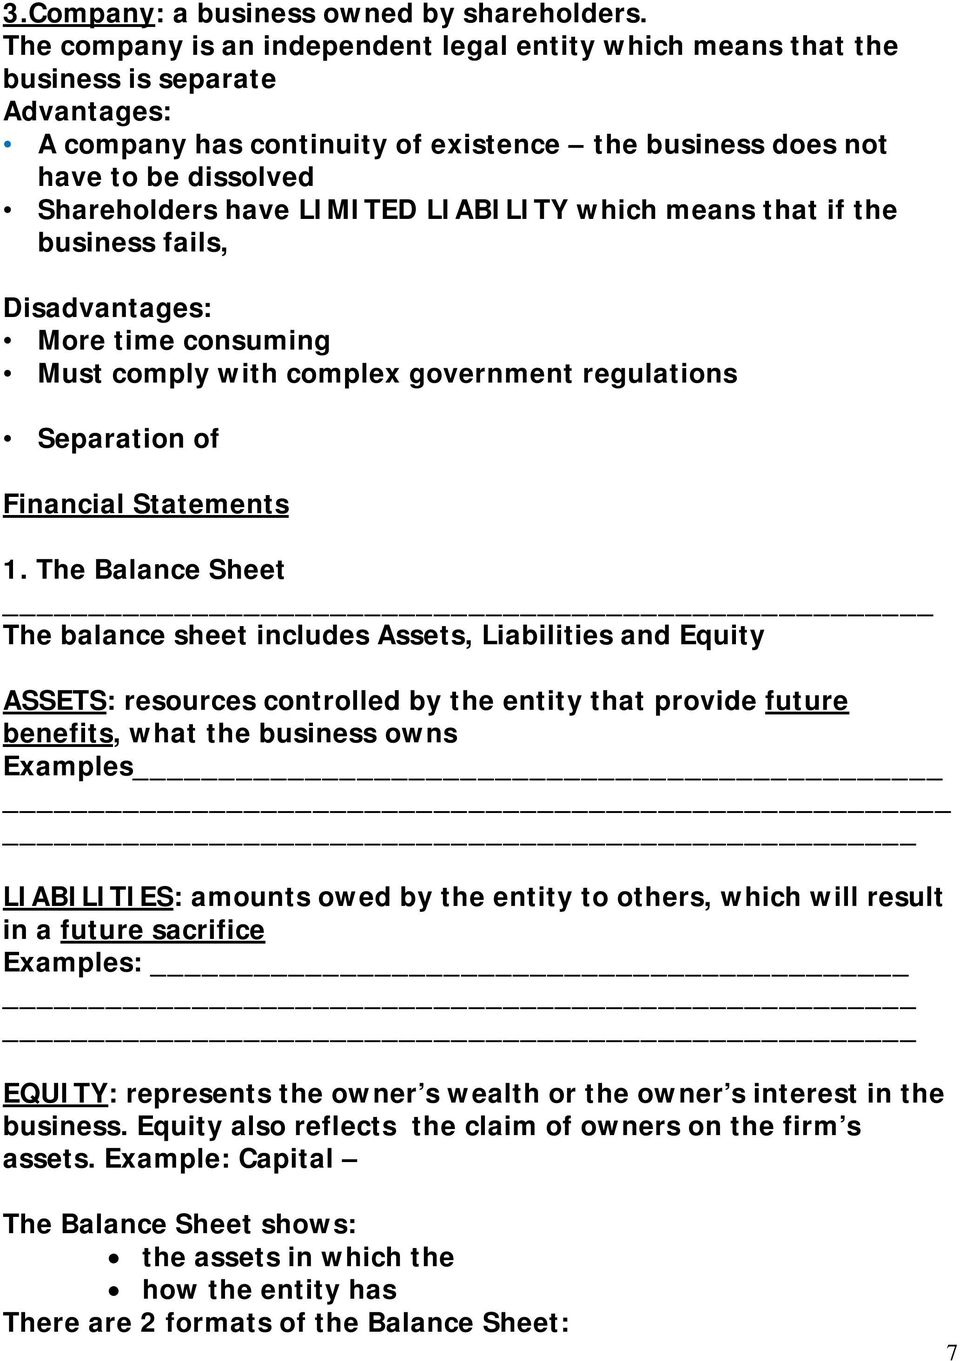 LIMITED LIABILITY which means that if the business fails, Disadvantages: More time consuming Must comply with complex government regulations Separation of Financial Statements 1.